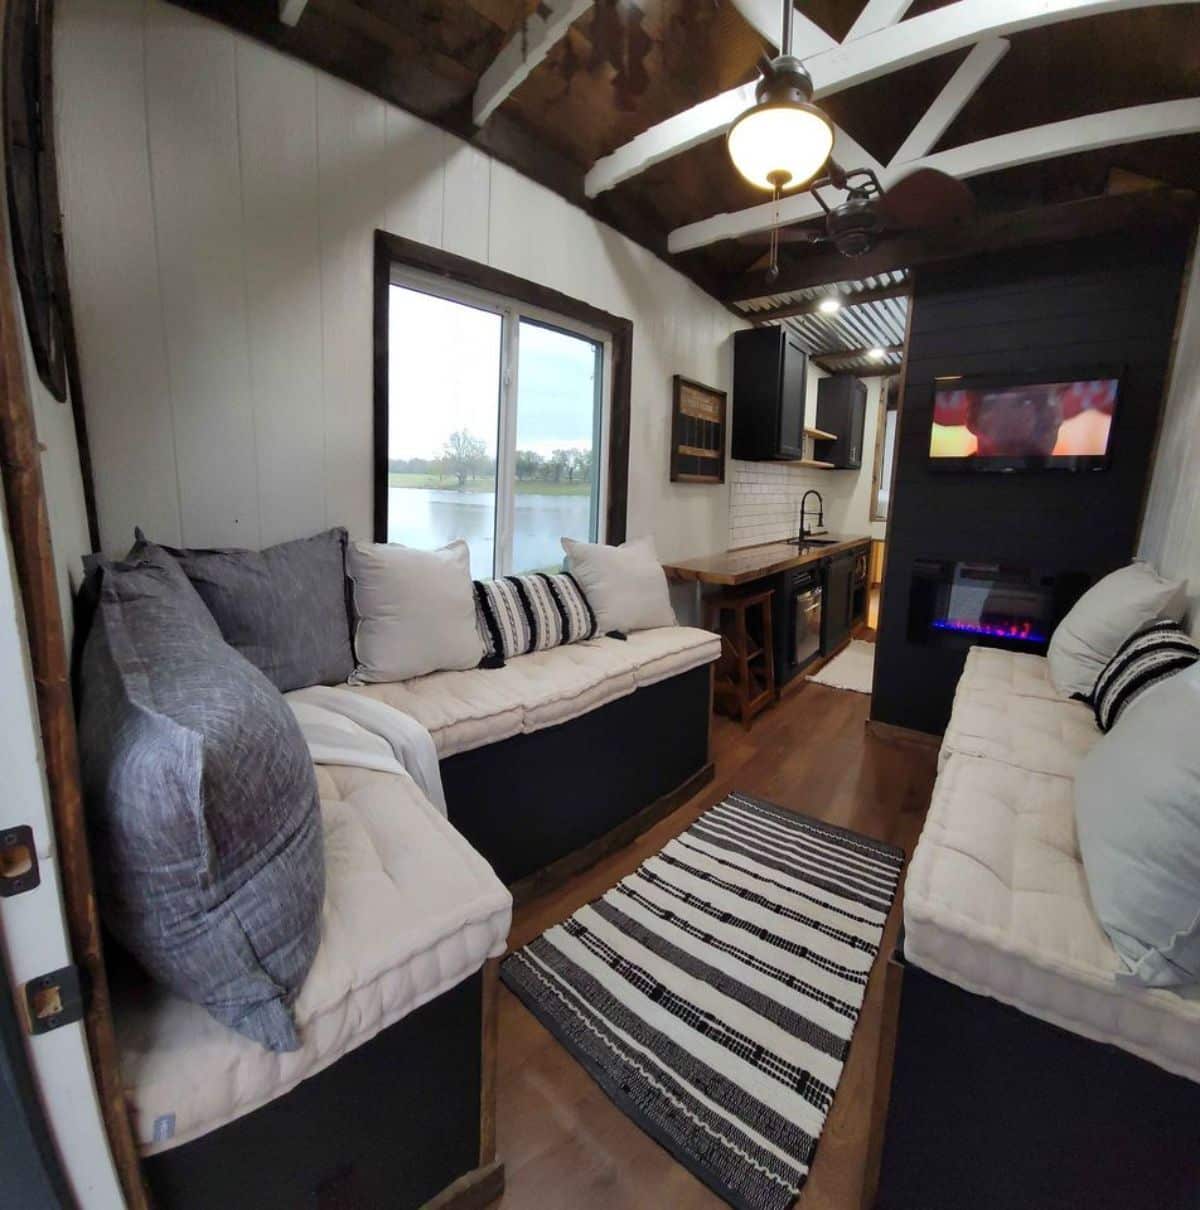 L shaped couch with TV set and an electric fireplace in living area of 25' tiny house on wheels